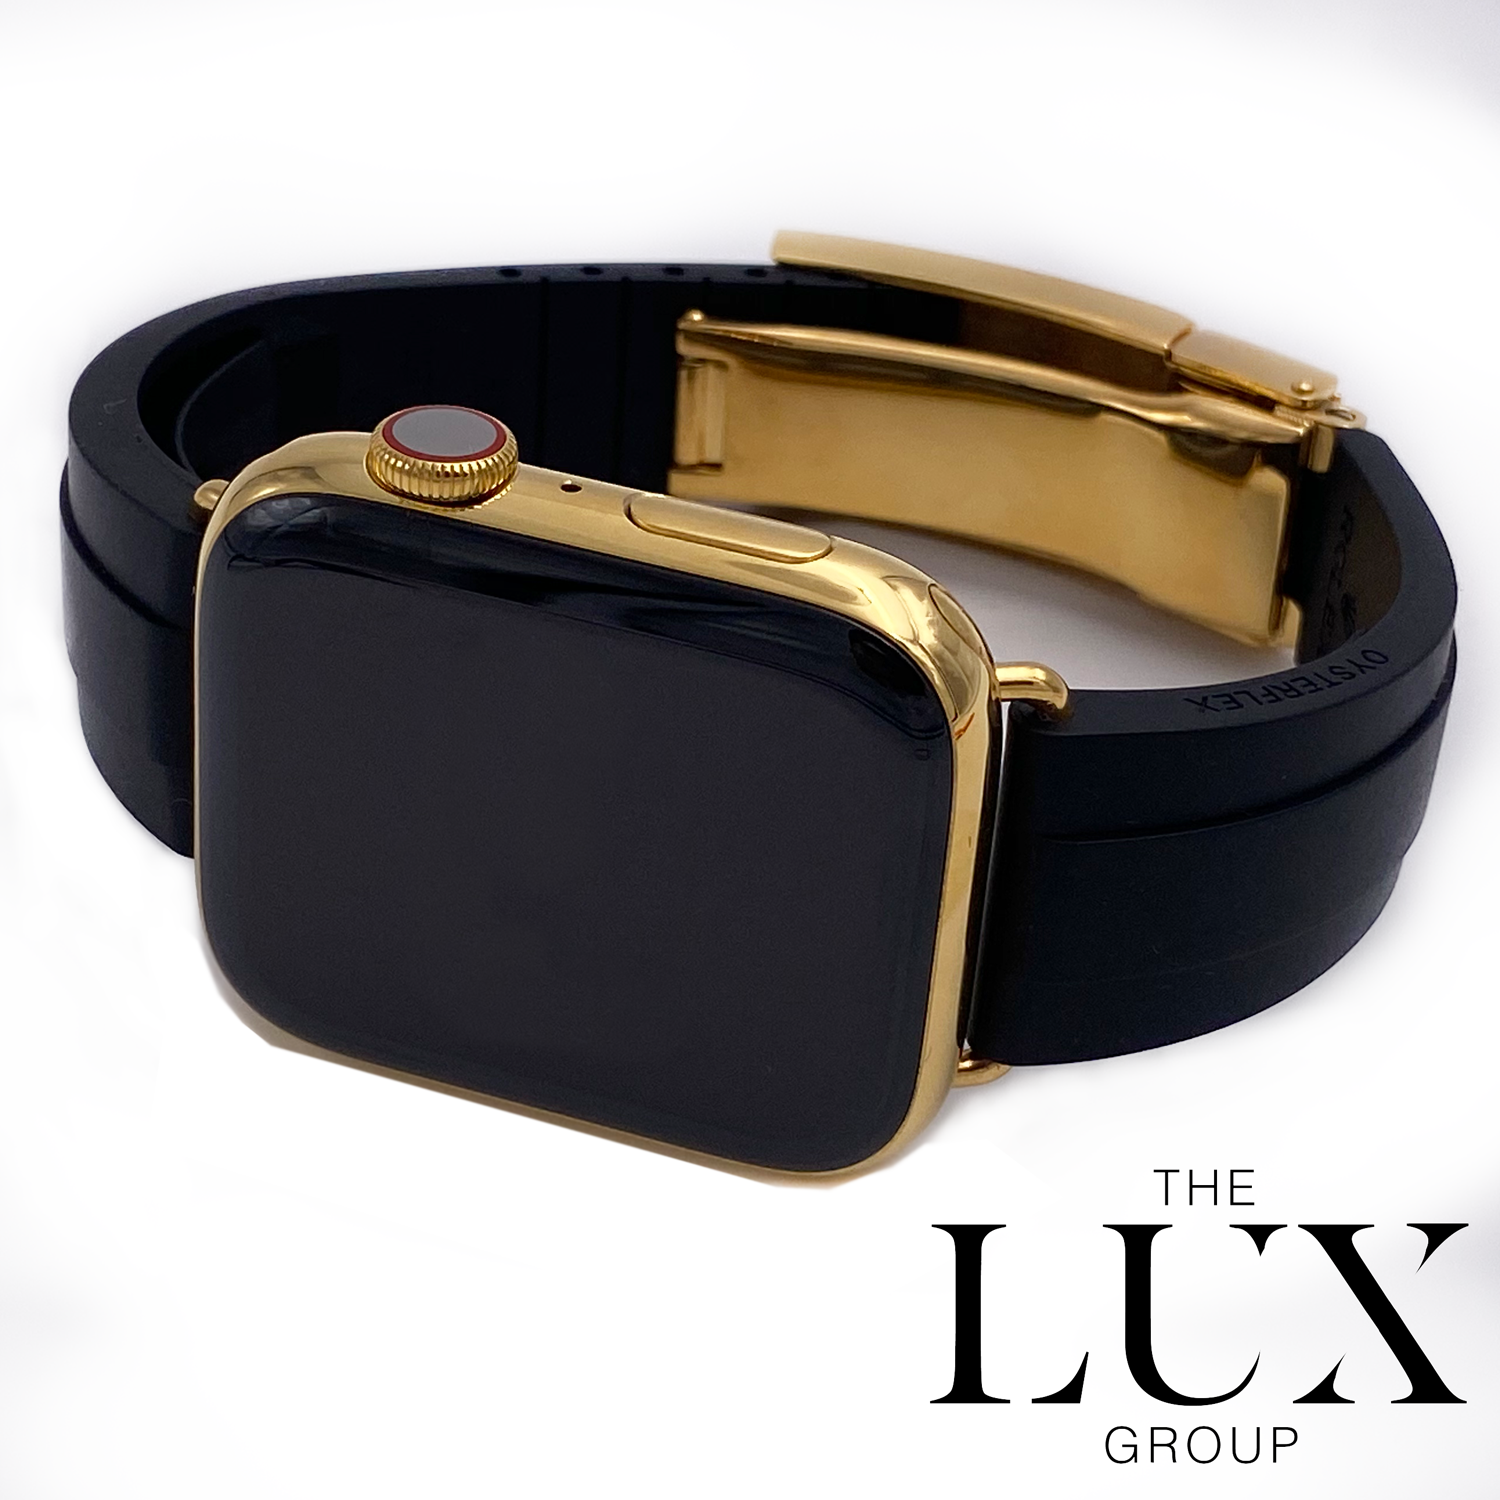 Series 7 Watch with 24K Black Rolex Oysterflex - The Lux Group